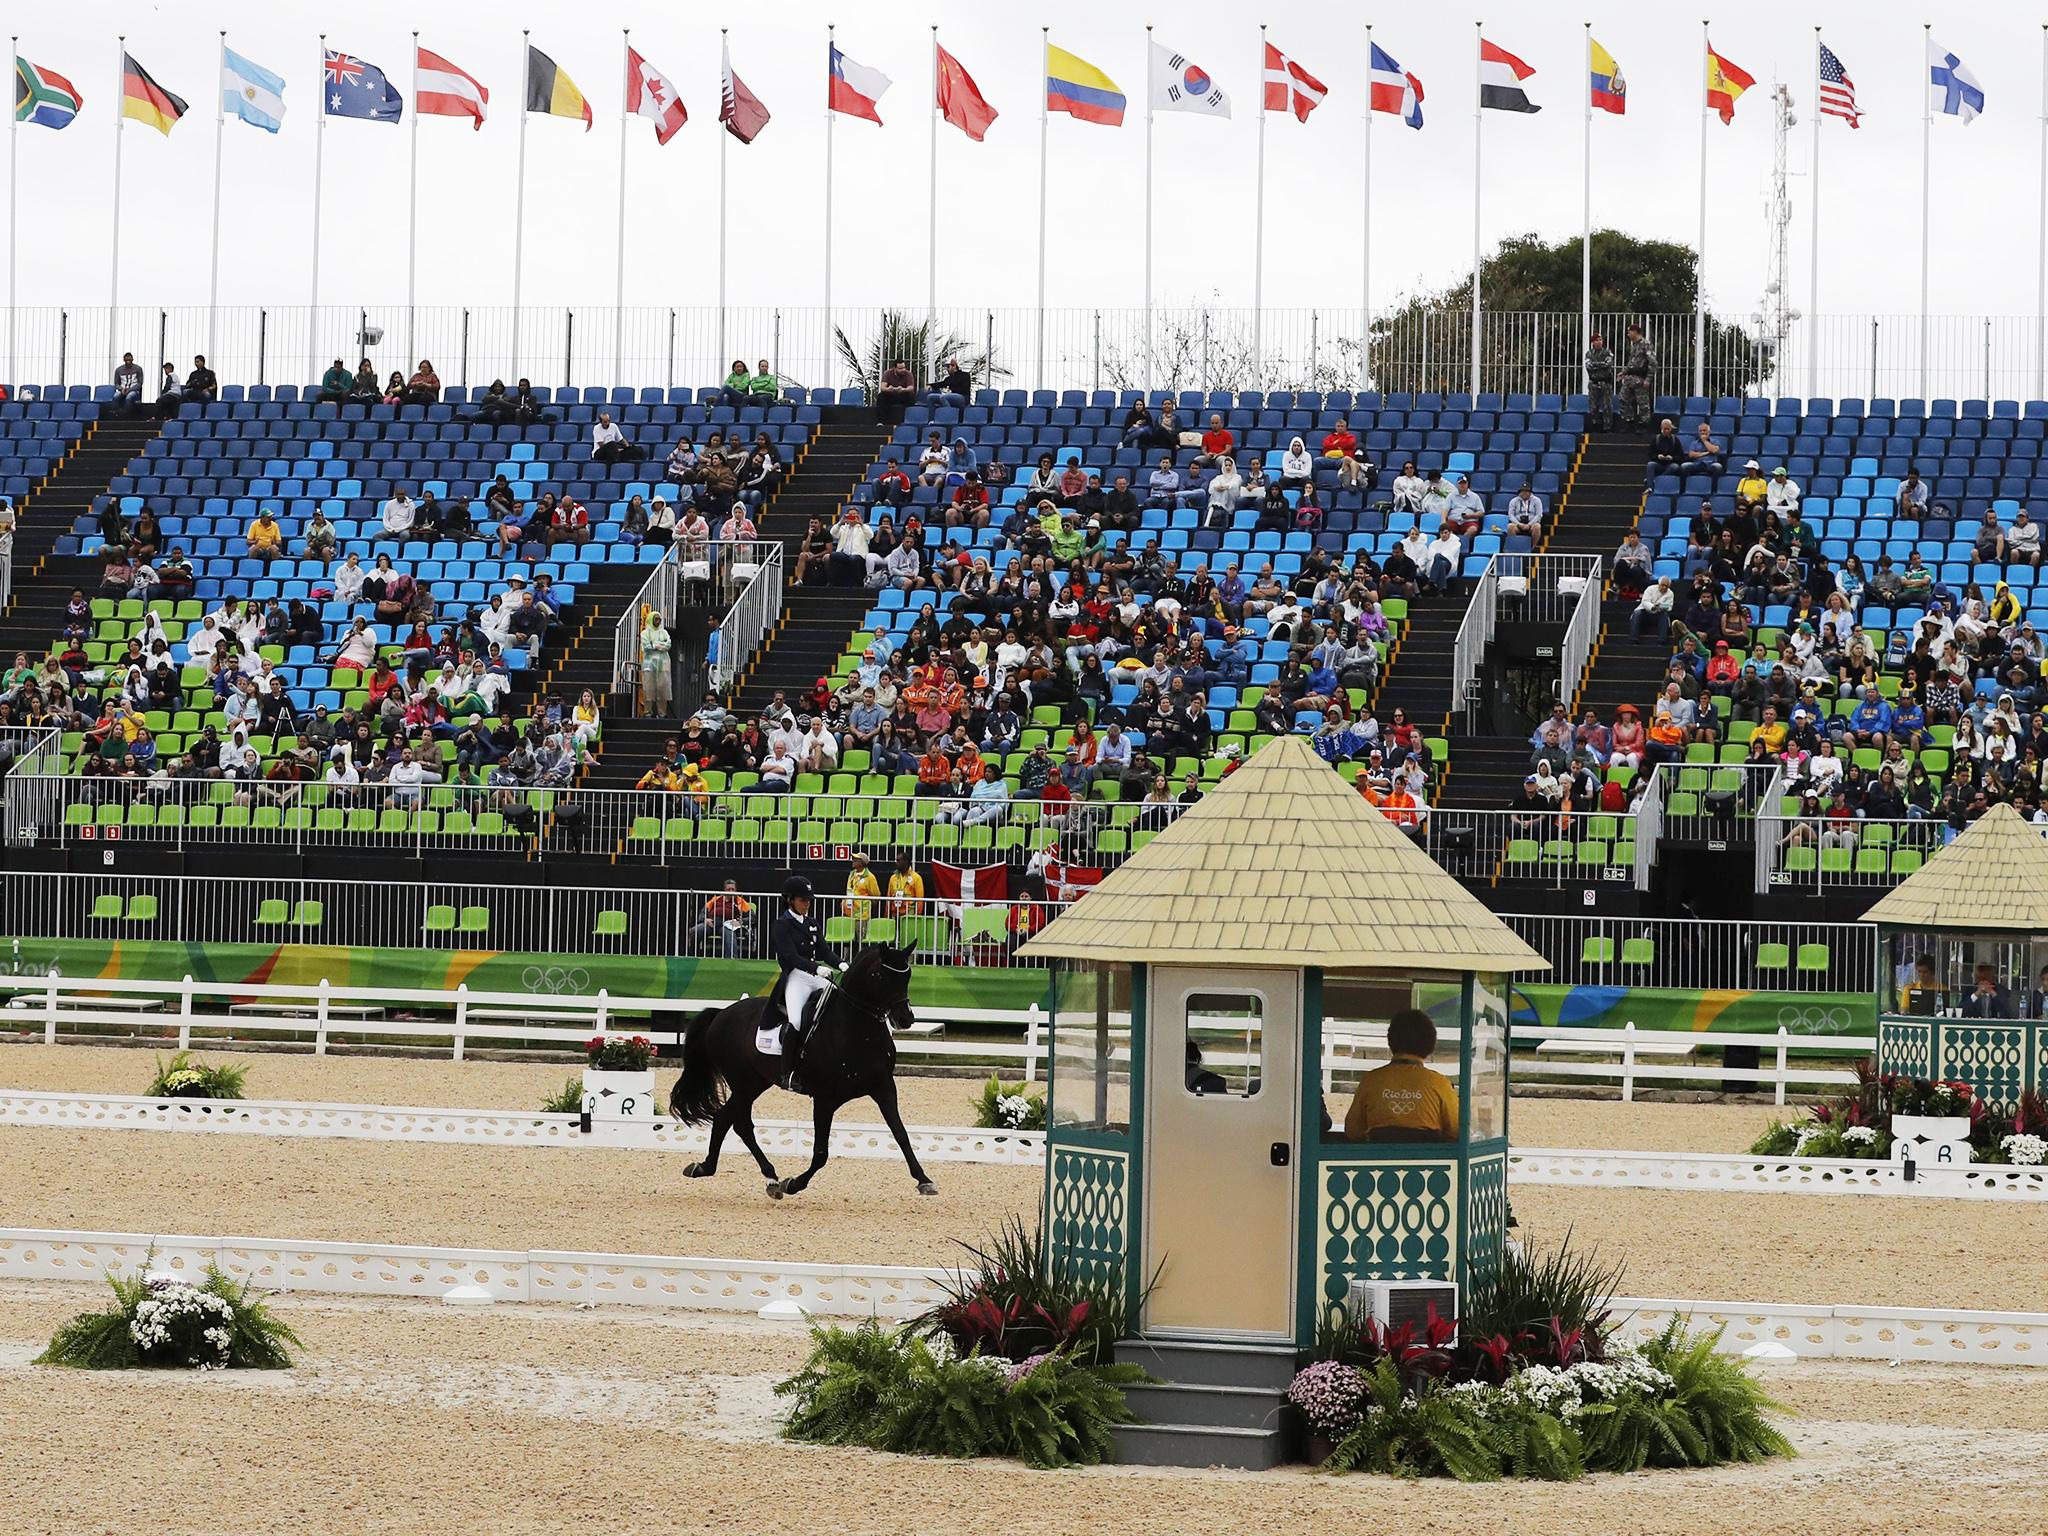 The equestrian events have been a turn-off for the Brazilian audience